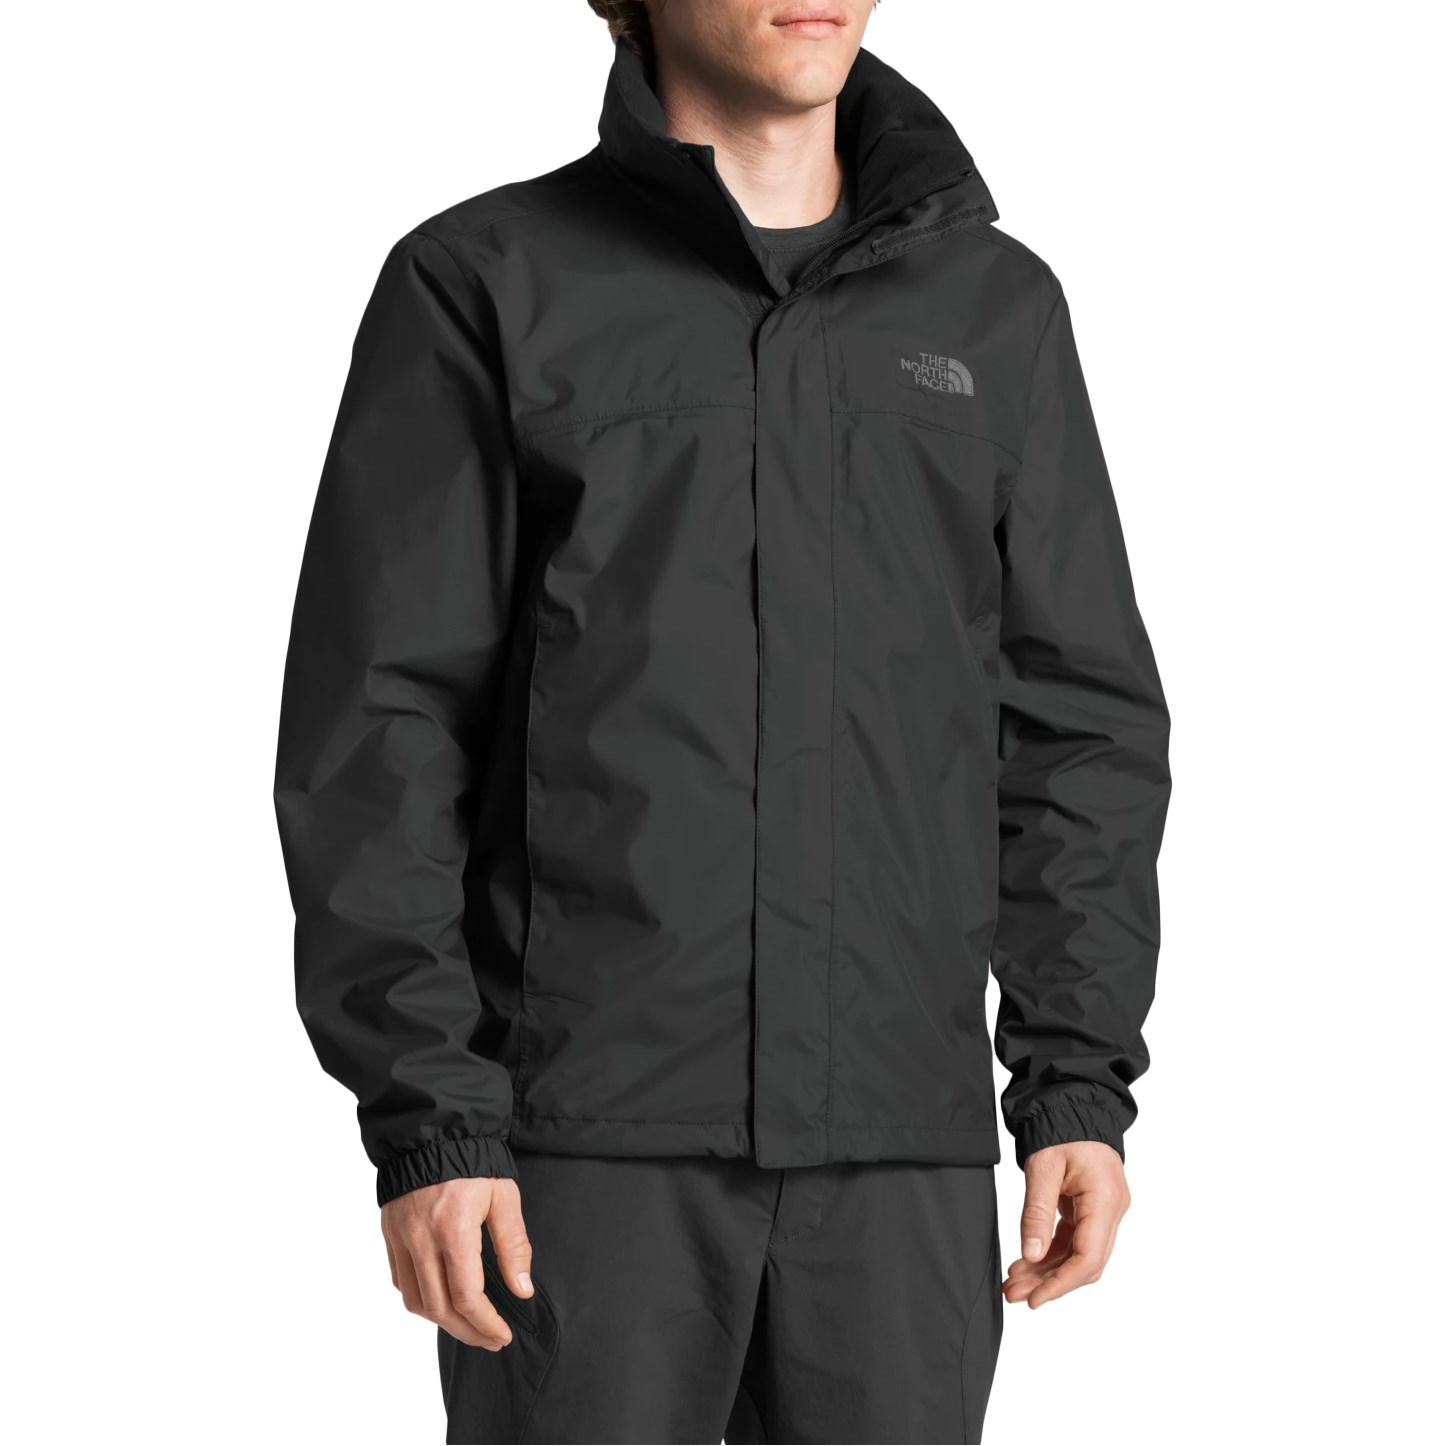 The North Face Resolve 2 Jacket | evo